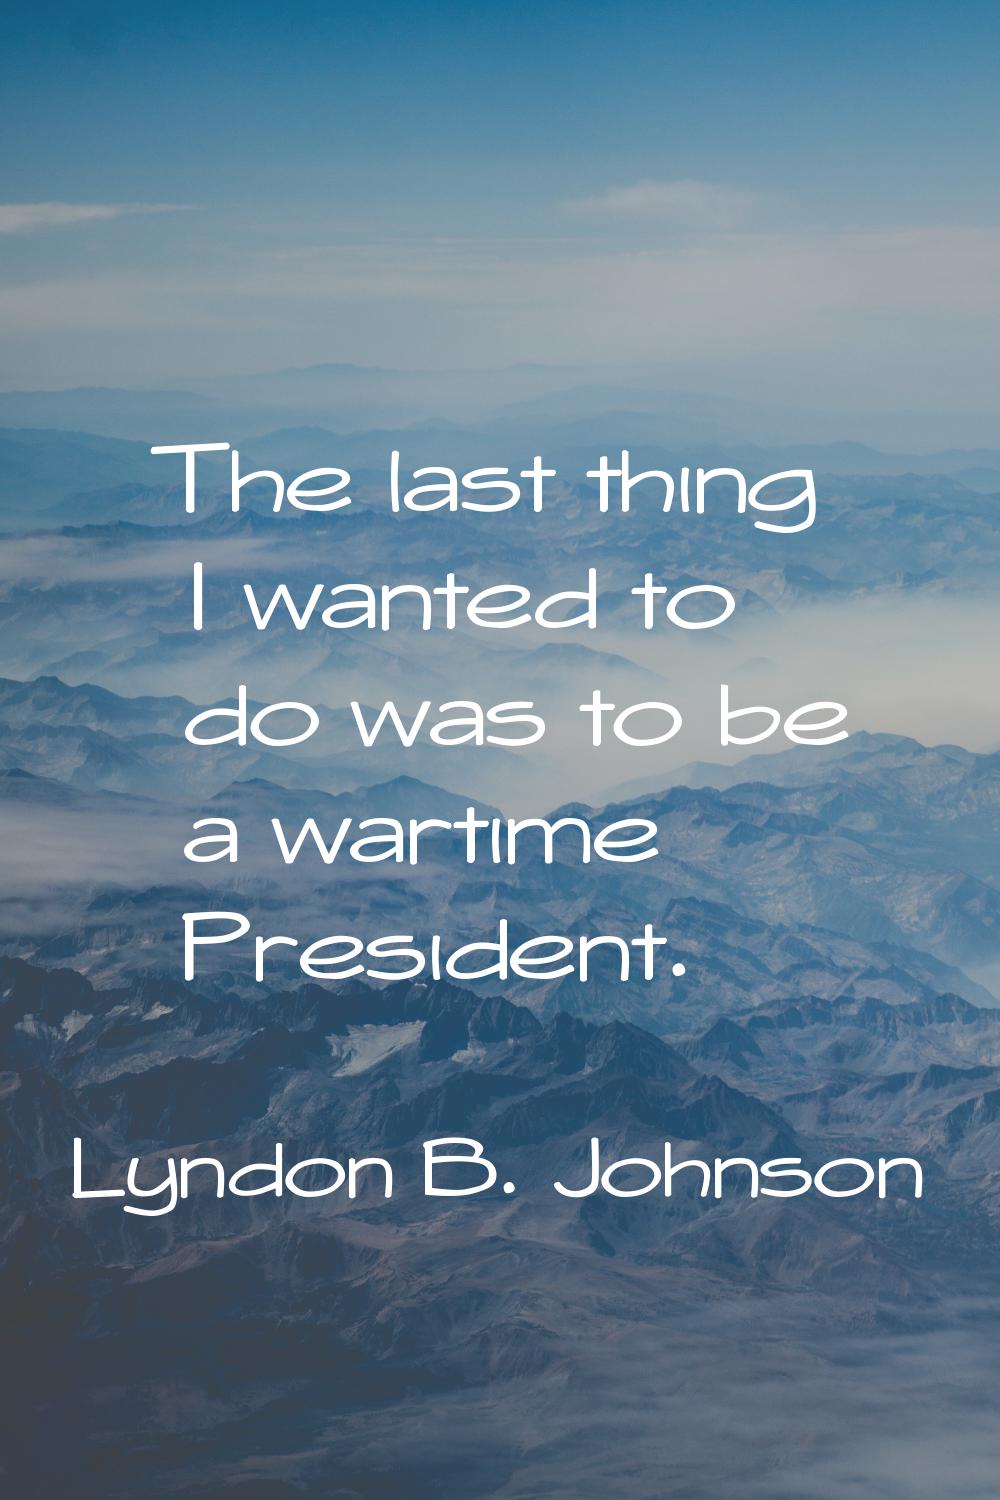 The last thing I wanted to do was to be a wartime President.